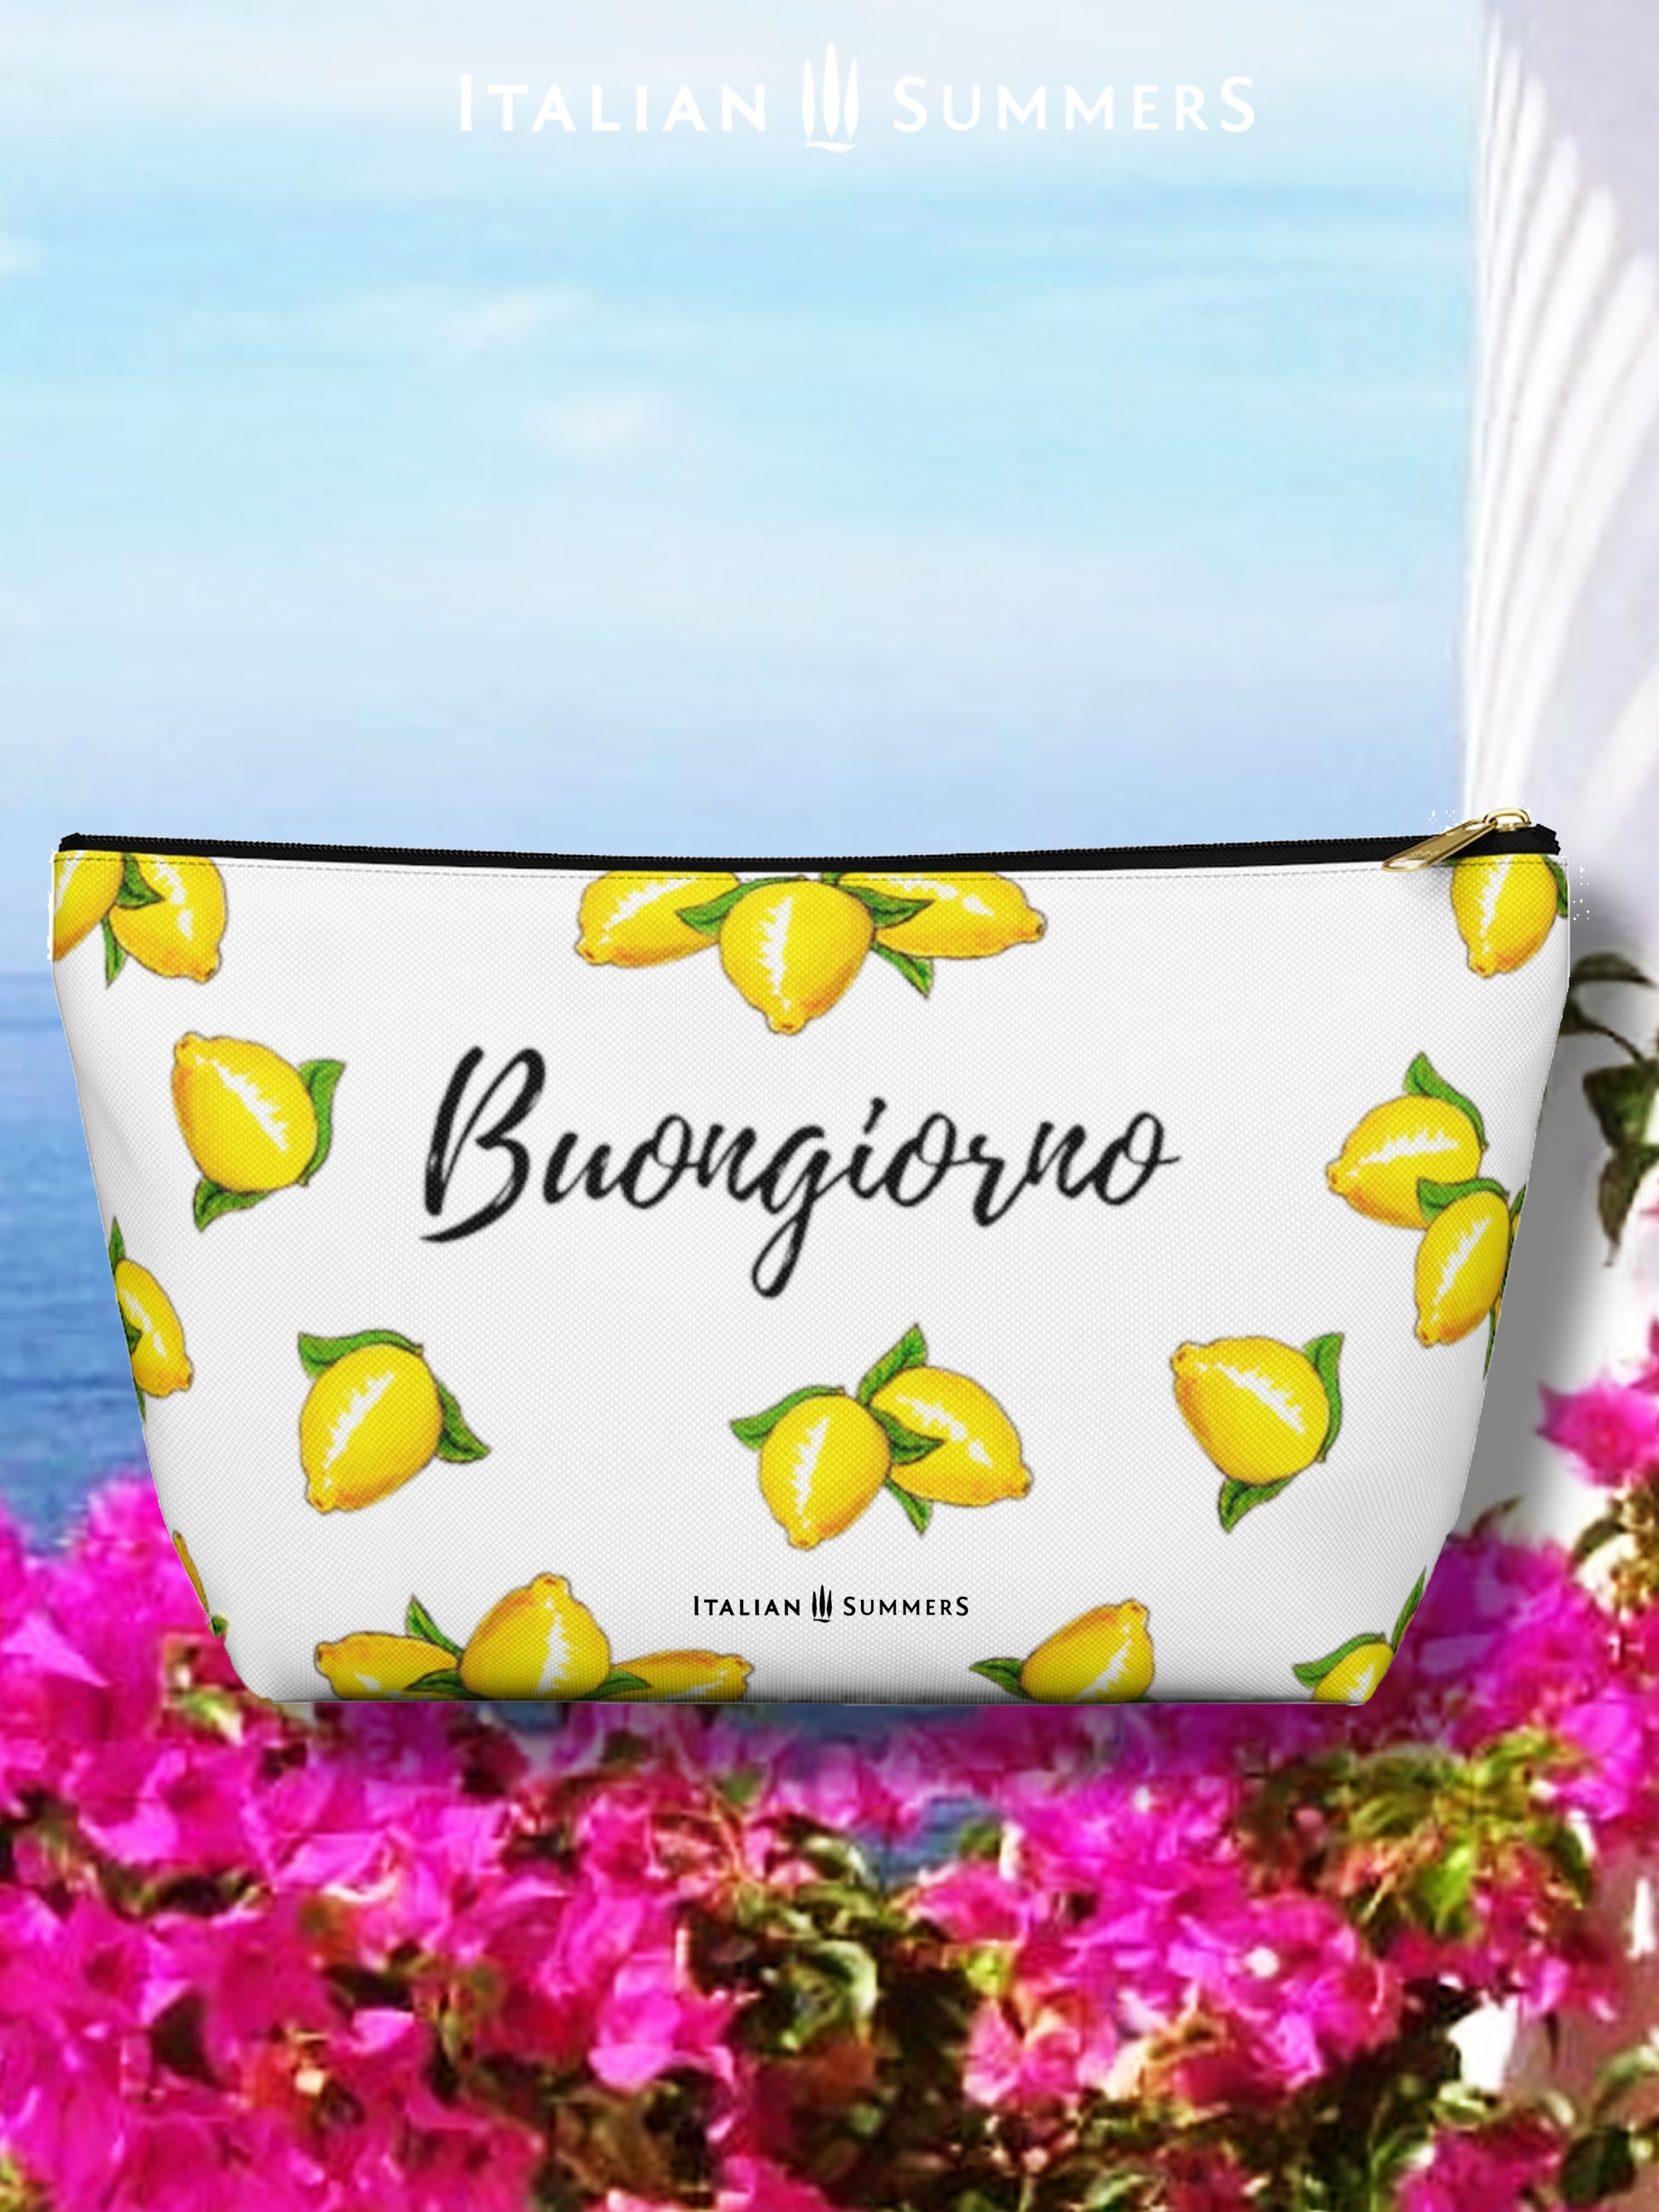 clutch BUONGIORNO LIMONI. Inspired by the sunny, Mediterranean vibes of Italy, this clutch is decorated with playful, happy Sorrento lemons and the classic Italian greeting of "Buongiorno".